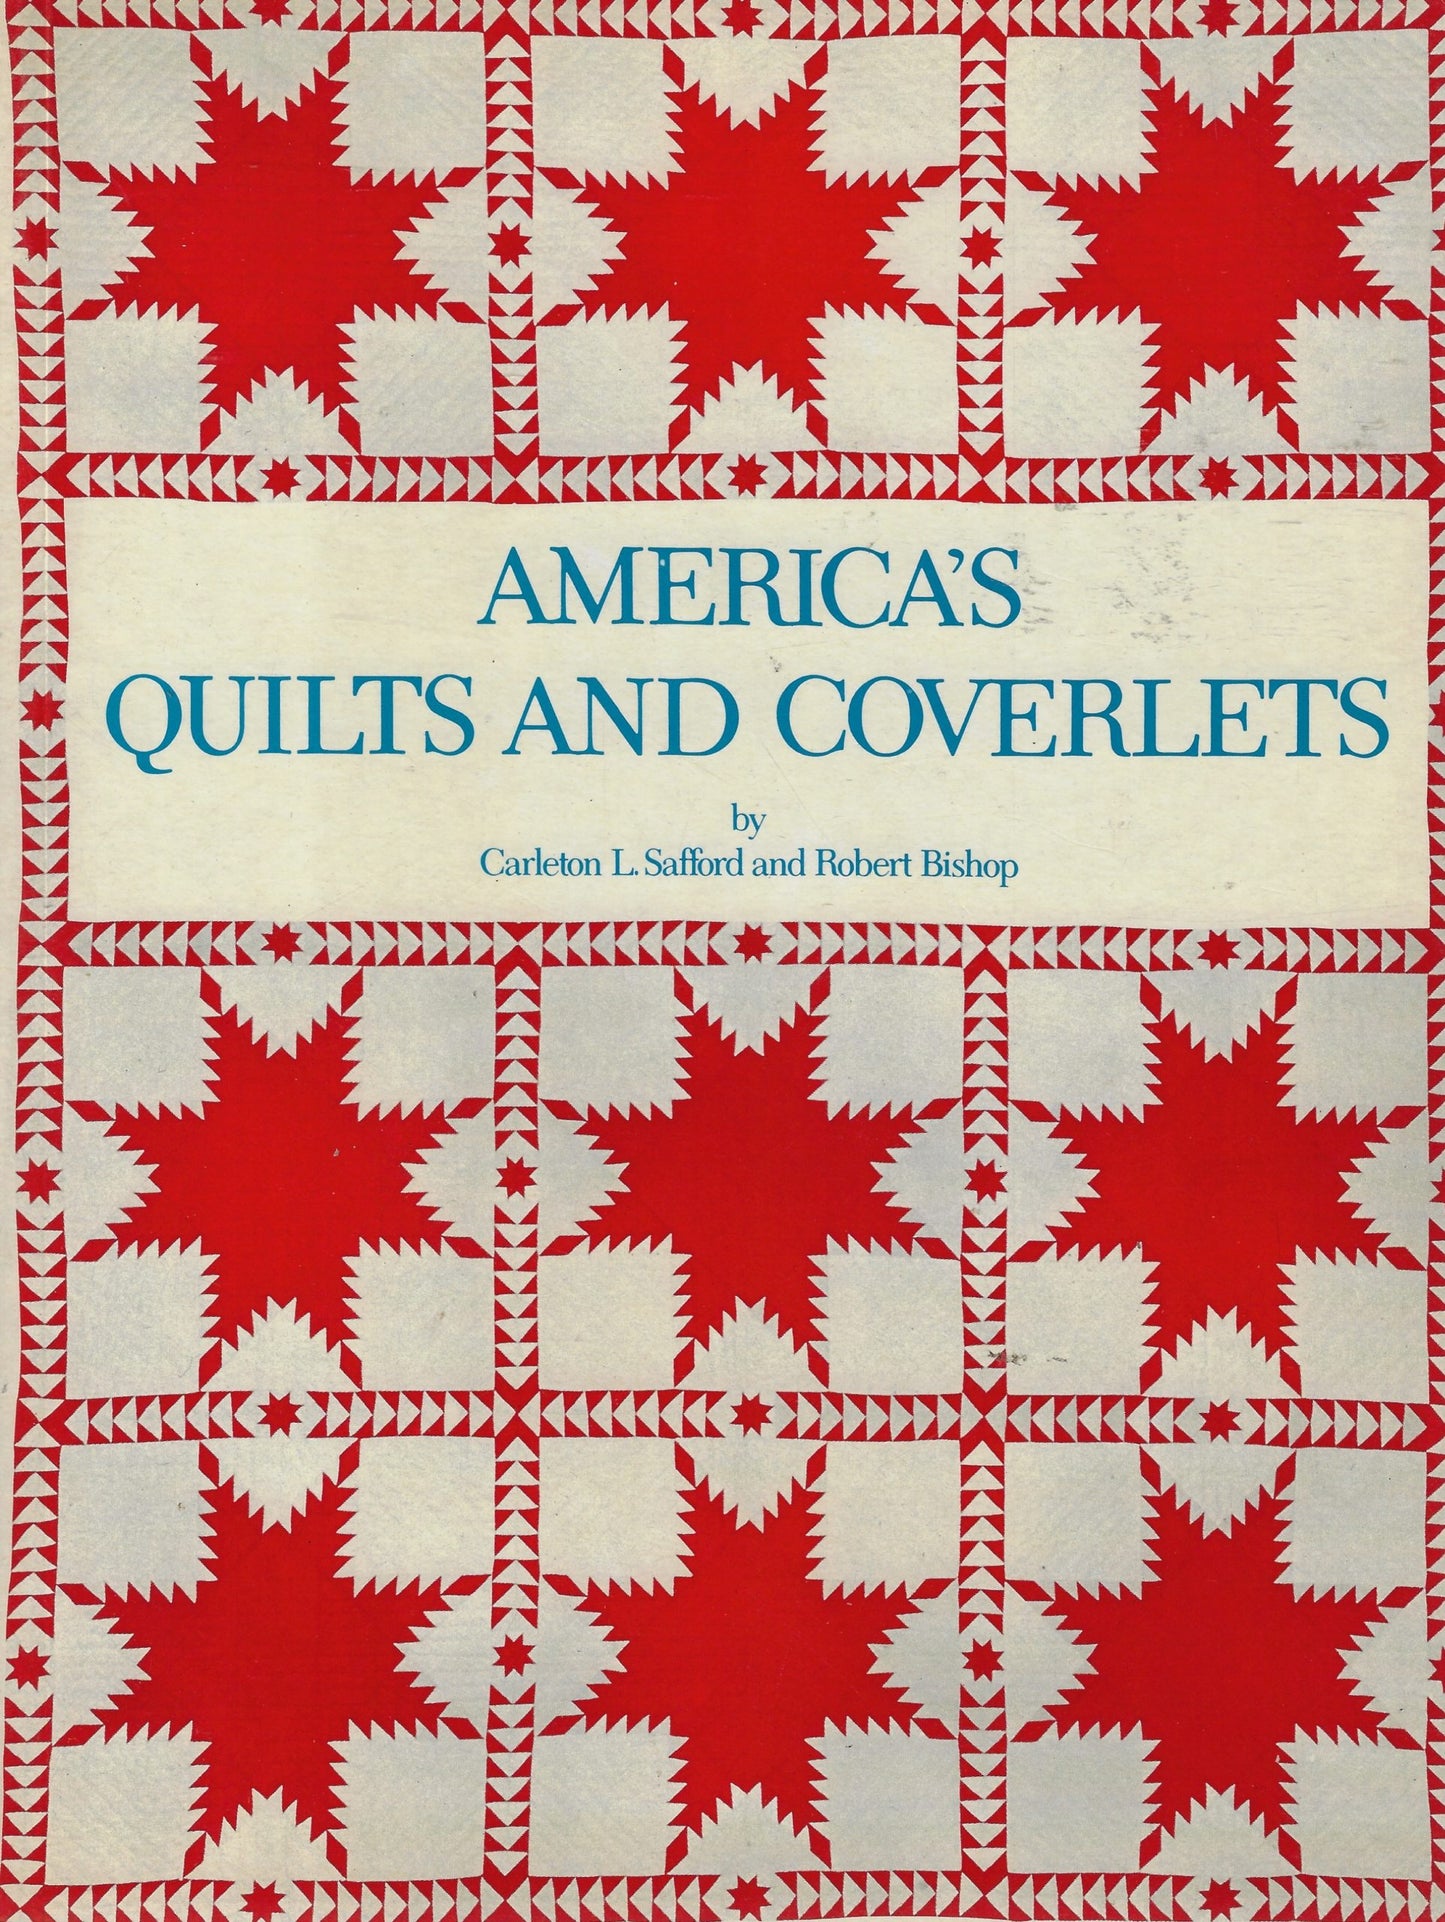 America's quilts and coverlets